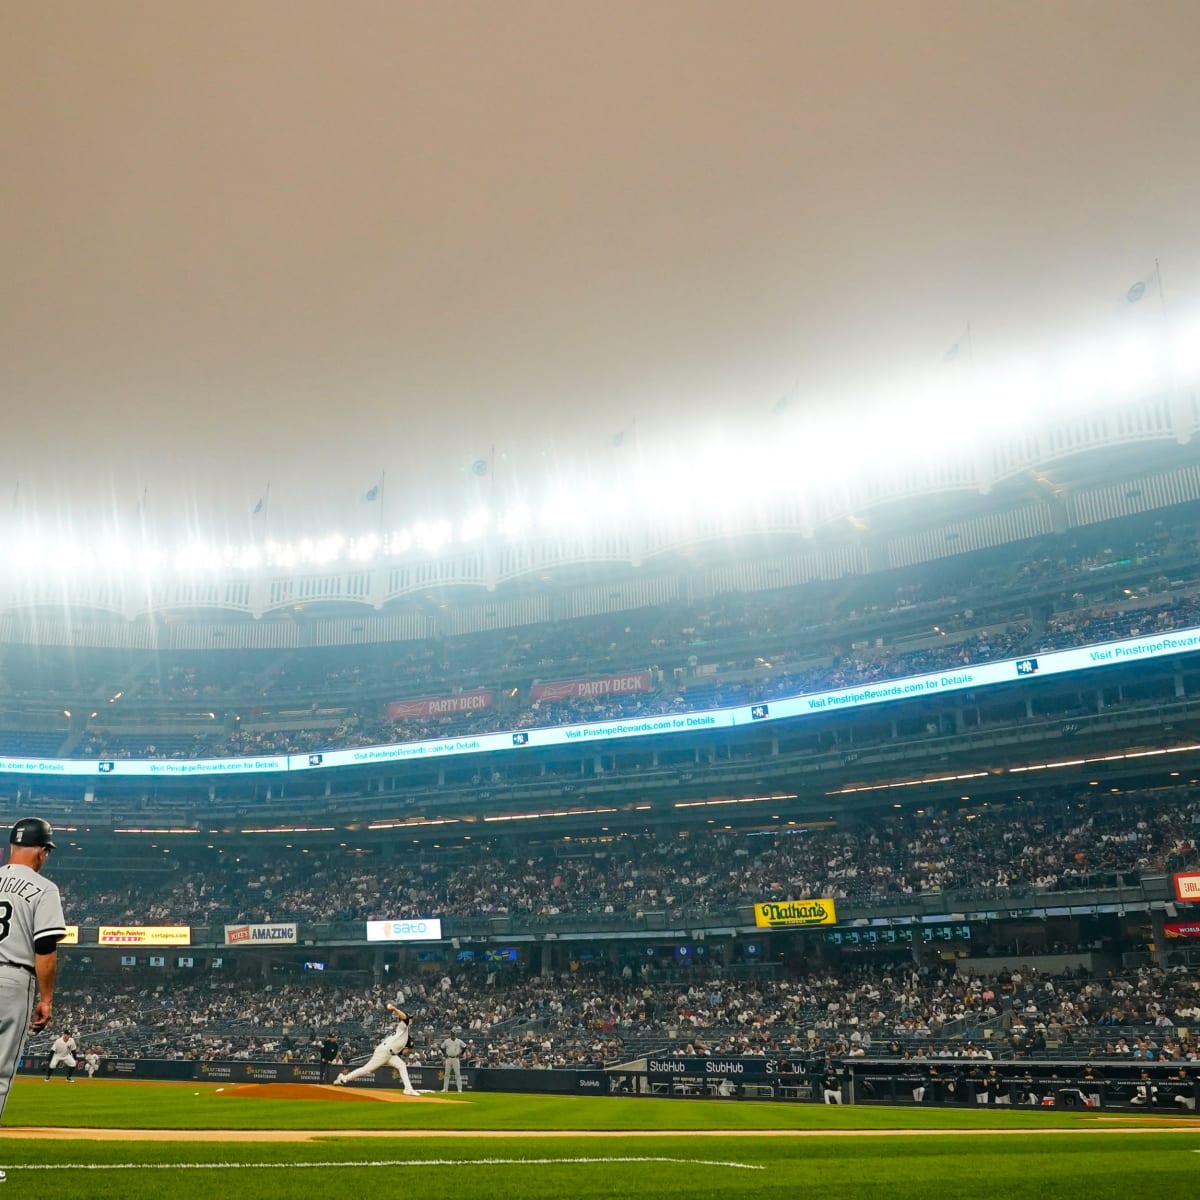 Images of Yankee Stadium Enveloped in Smoke Portray Dystopian Scene -  Sports Illustrated